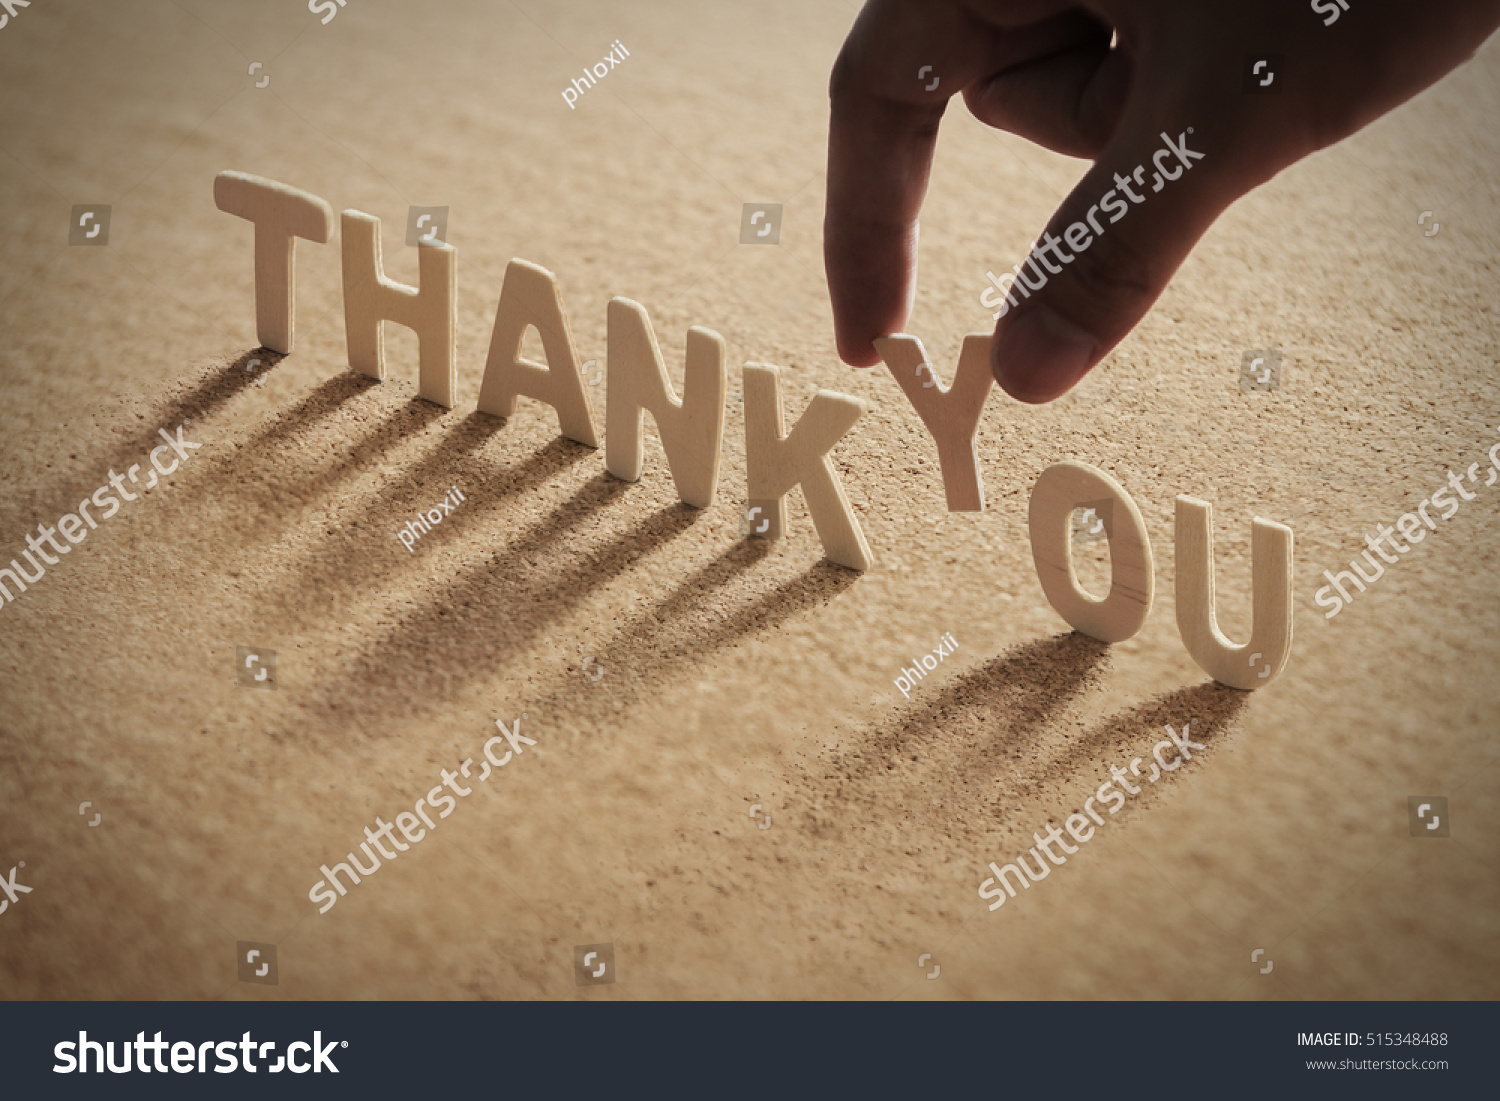 stock-photo-thank-you-word-of-wood-alphabet-with-shadow-on-cork-board-compressed-board-515348488.jpg